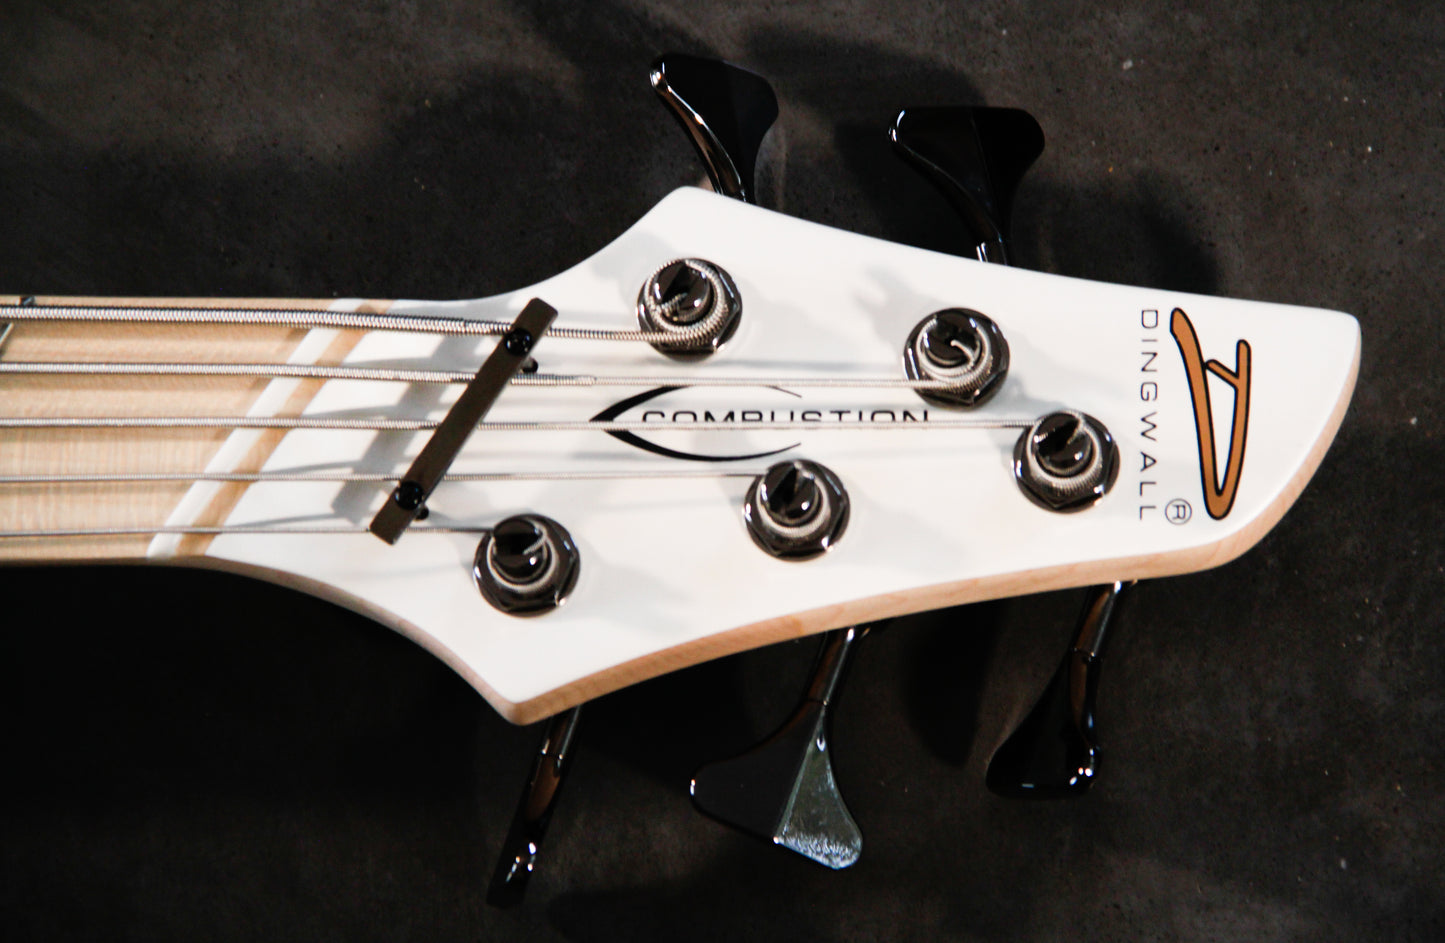 DINGWALL GUITARS NG3 NOLLY SIGNATURE 5 STRING 'Ducati White Pearl" (2 pieces - 2 3 weeks)